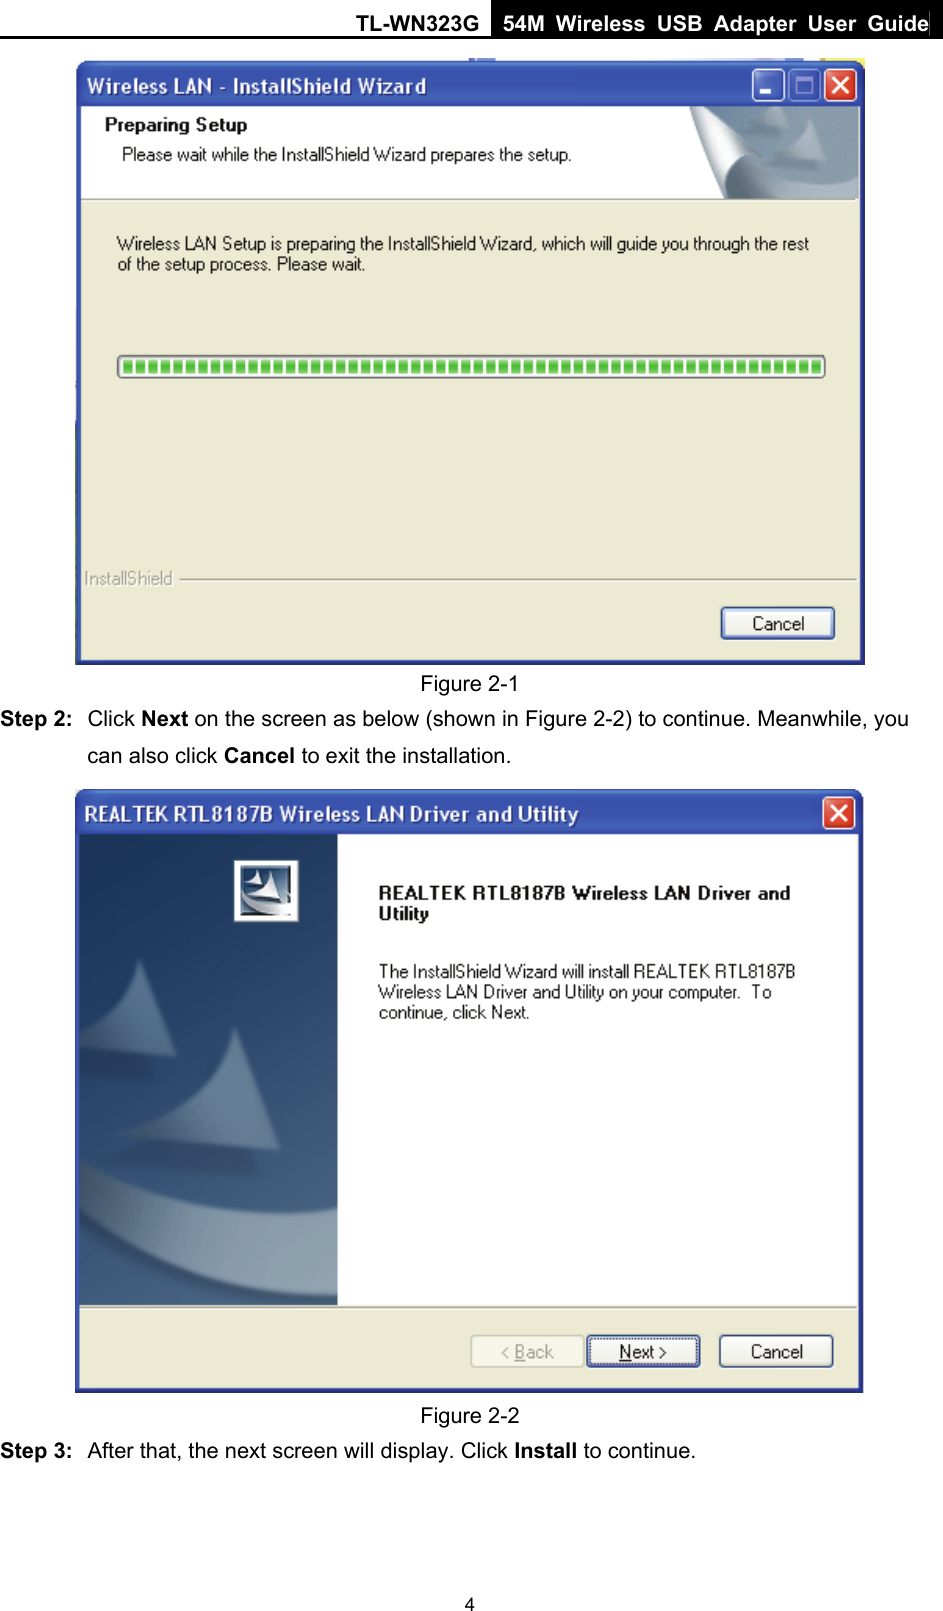 TL-WN323G 54M Wireless USB Adapter User Guide   4 Figure 2-1 Step 2:  Click Next on the screen as below (shown in Figure 2-2) to continue. Meanwhile, you can also click Cancel to exit the installation.  Figure 2-2 Step 3:  After that, the next screen will display. Click Install to continue. 